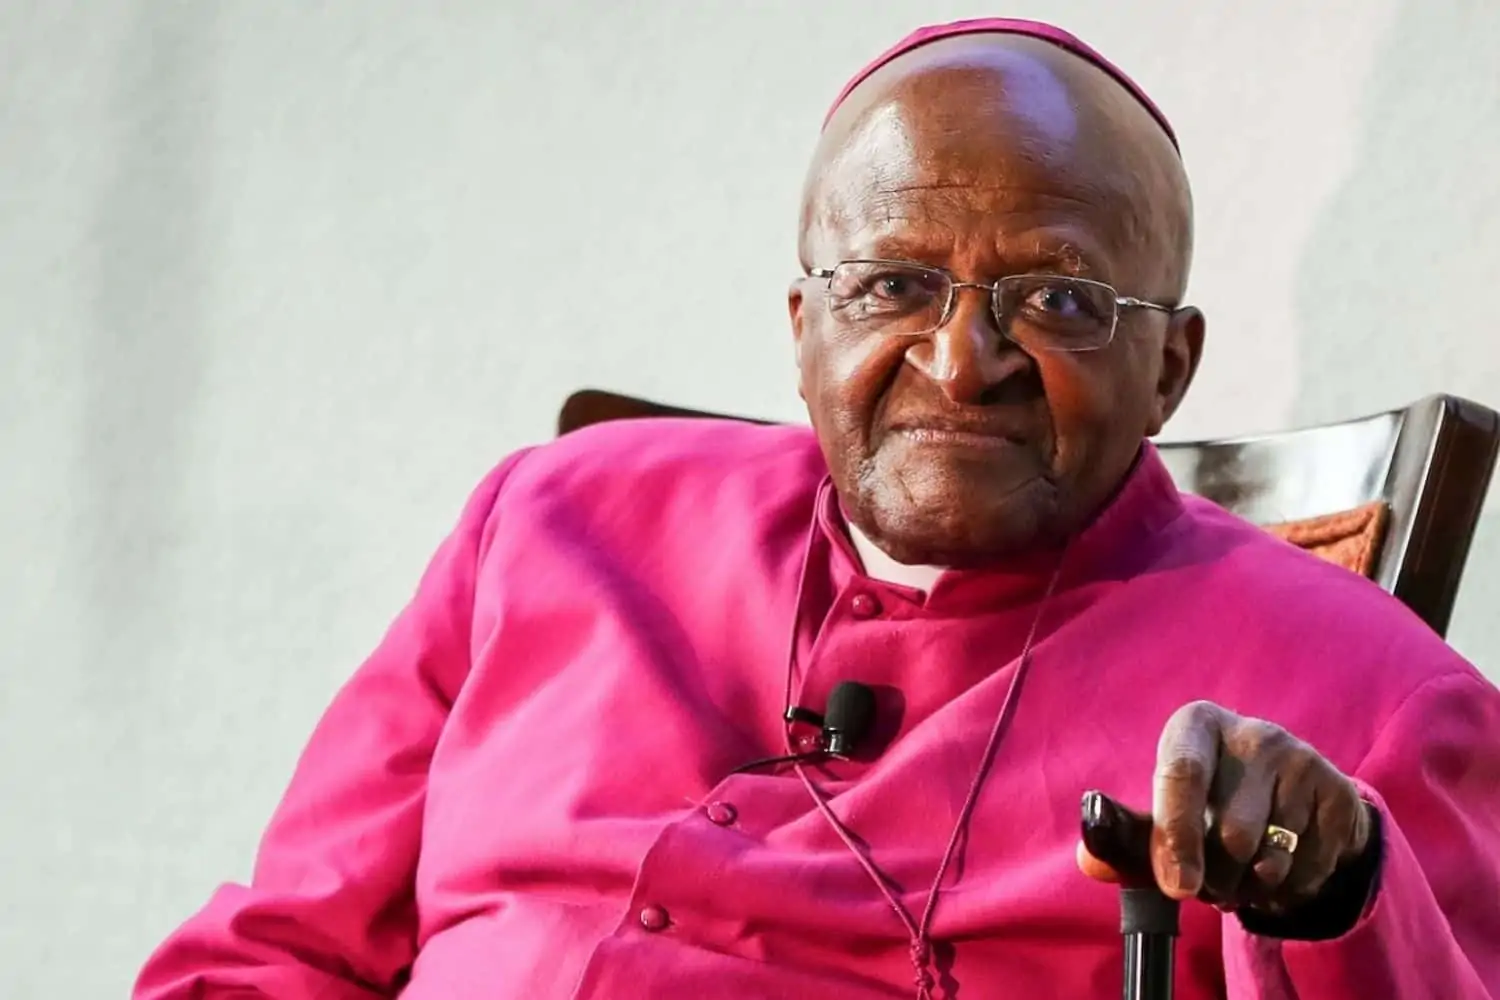 Archbishop Makgoba concerned about how Covid restrictions will affect Desmond Tutu's funeral